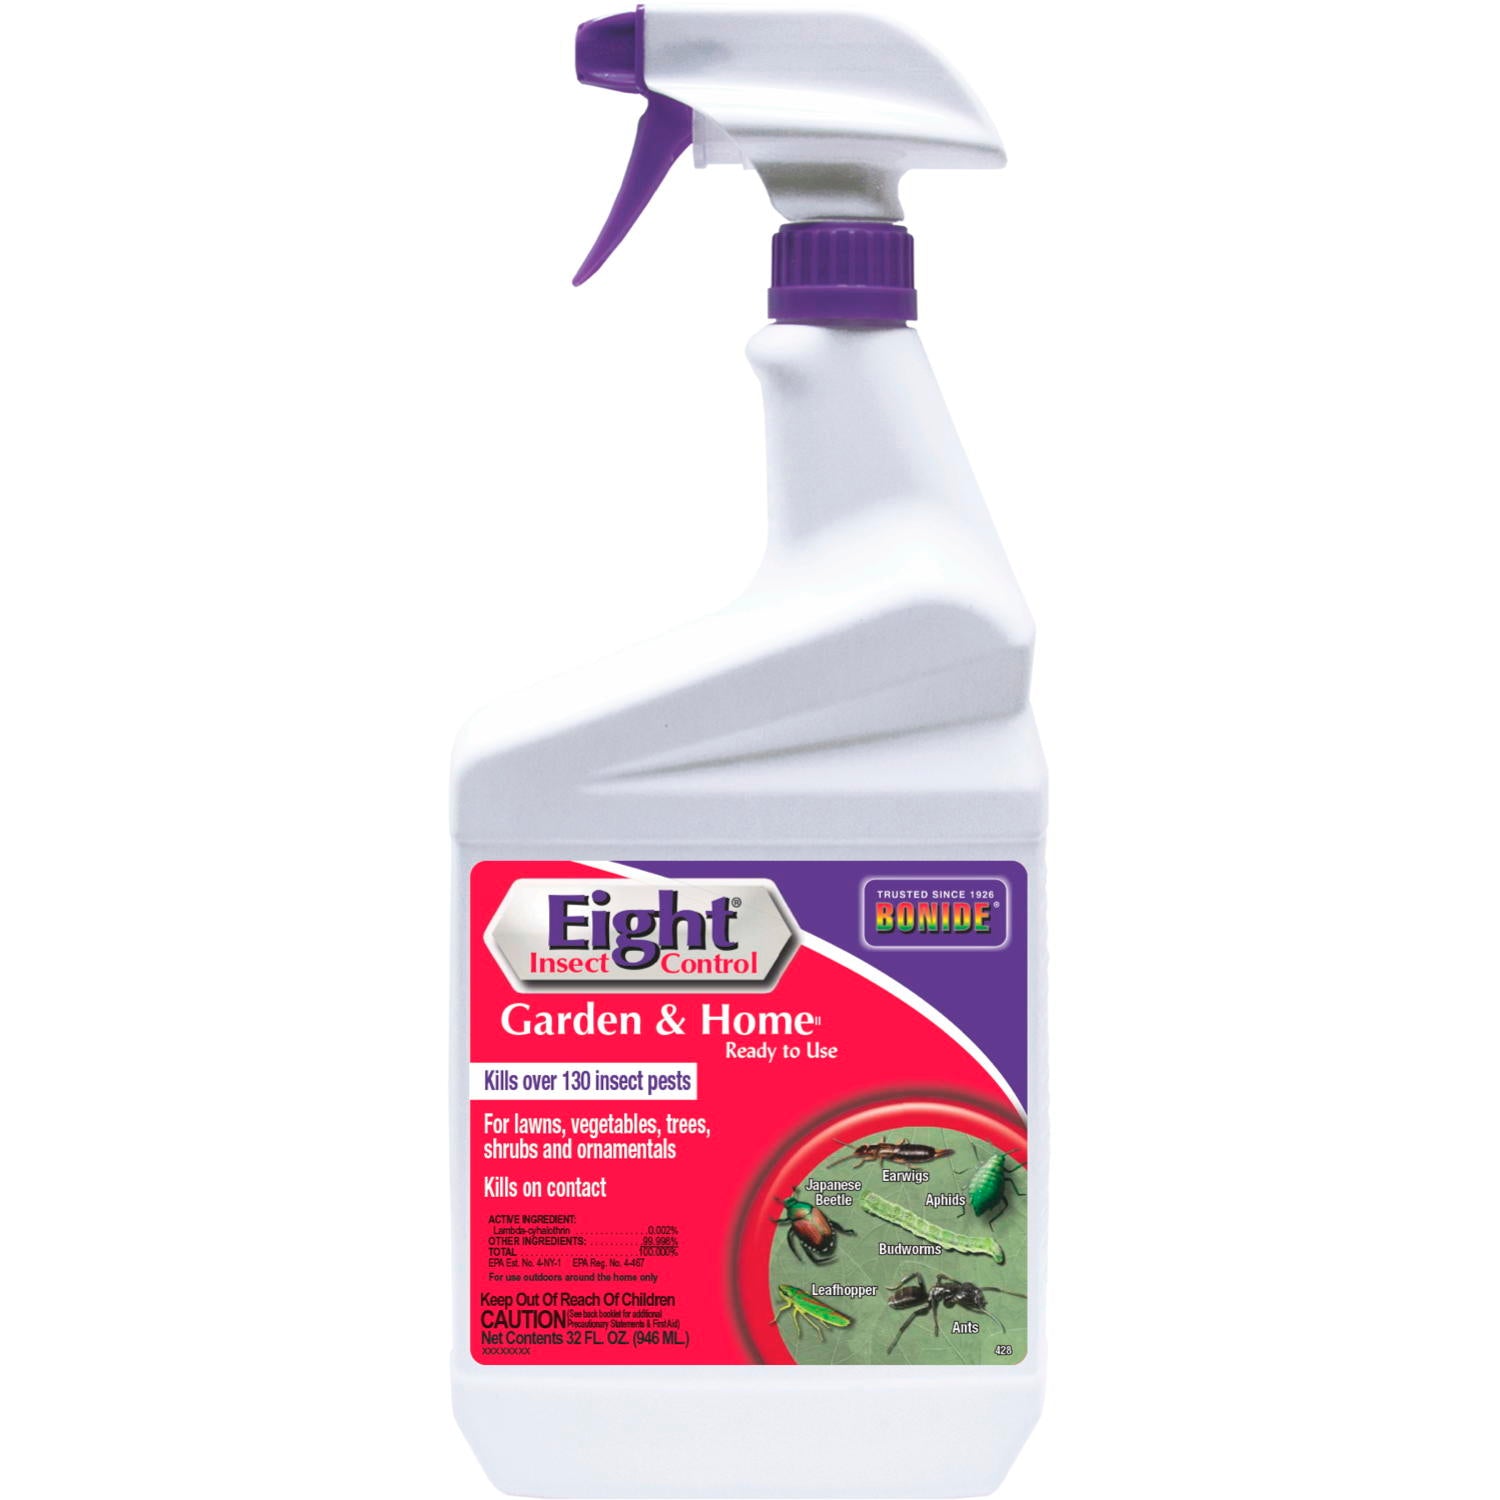 Vegetable Garden Spray that controls over 100+ pests including aphids, worms and Japanese beetles